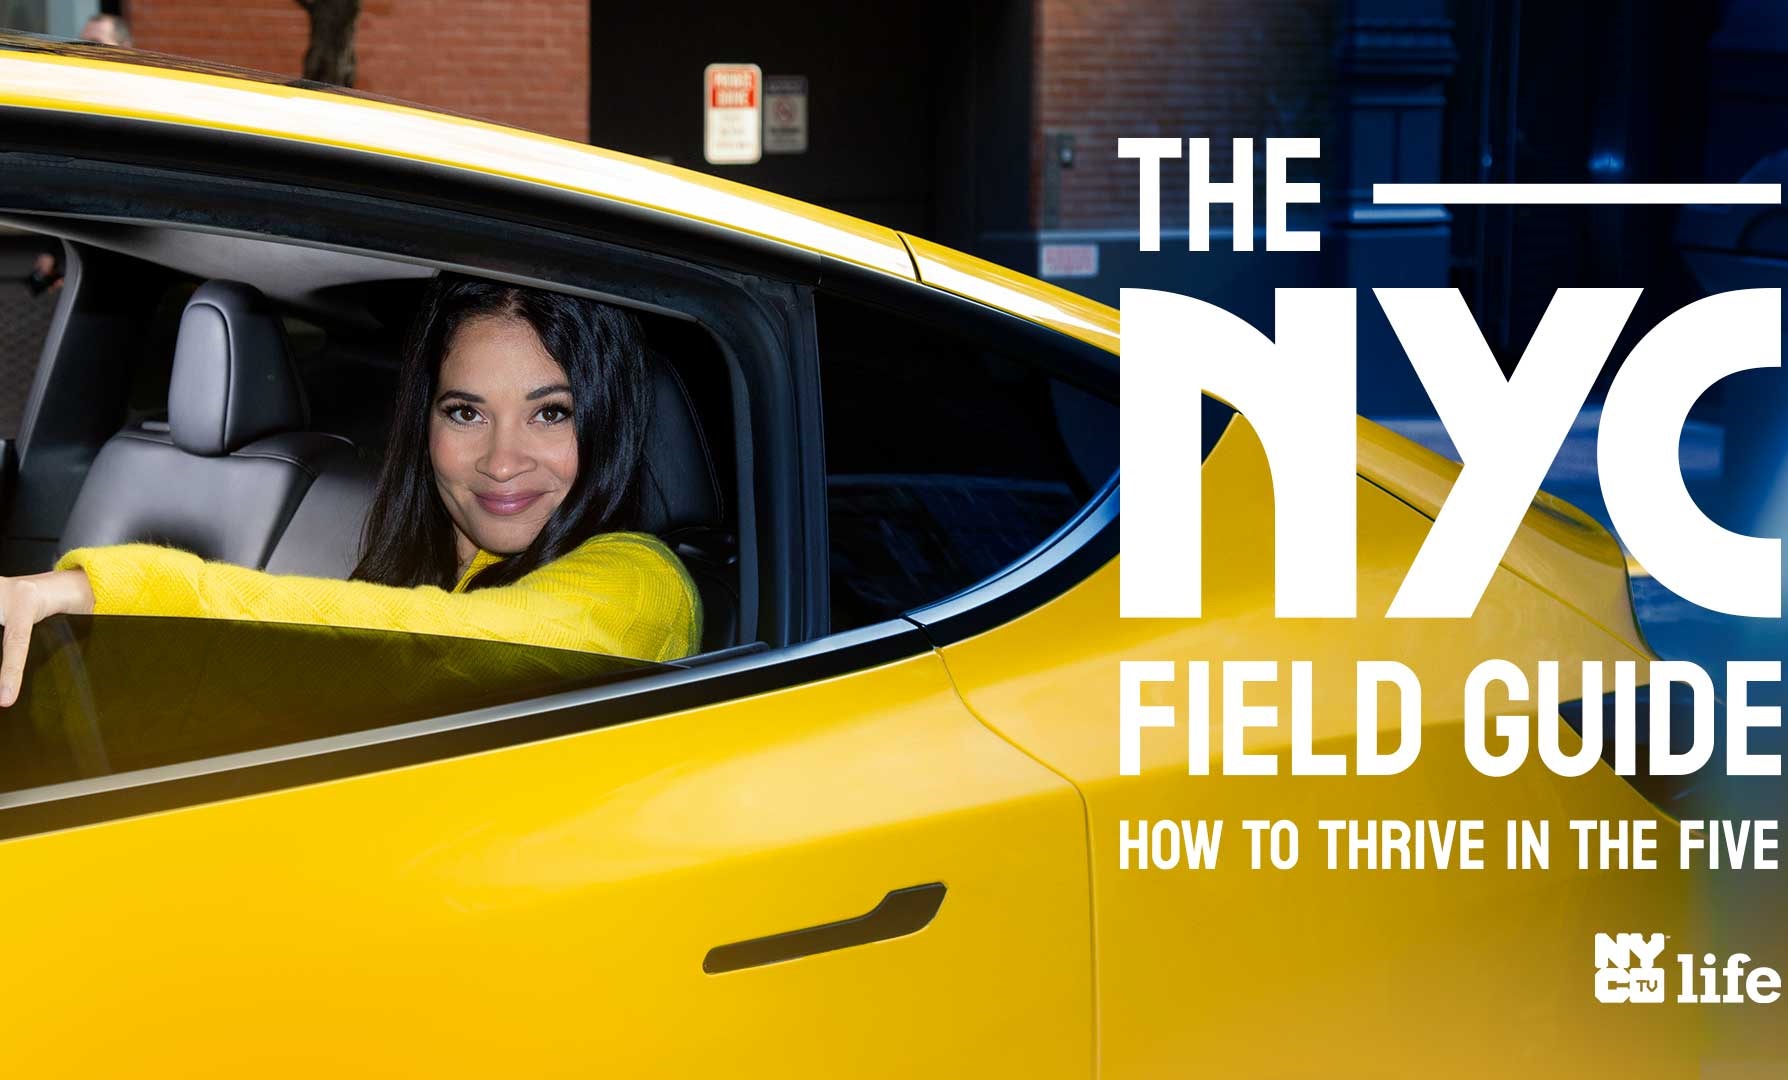 The NYC Field Guide: How to Thrive in the Five
                                           